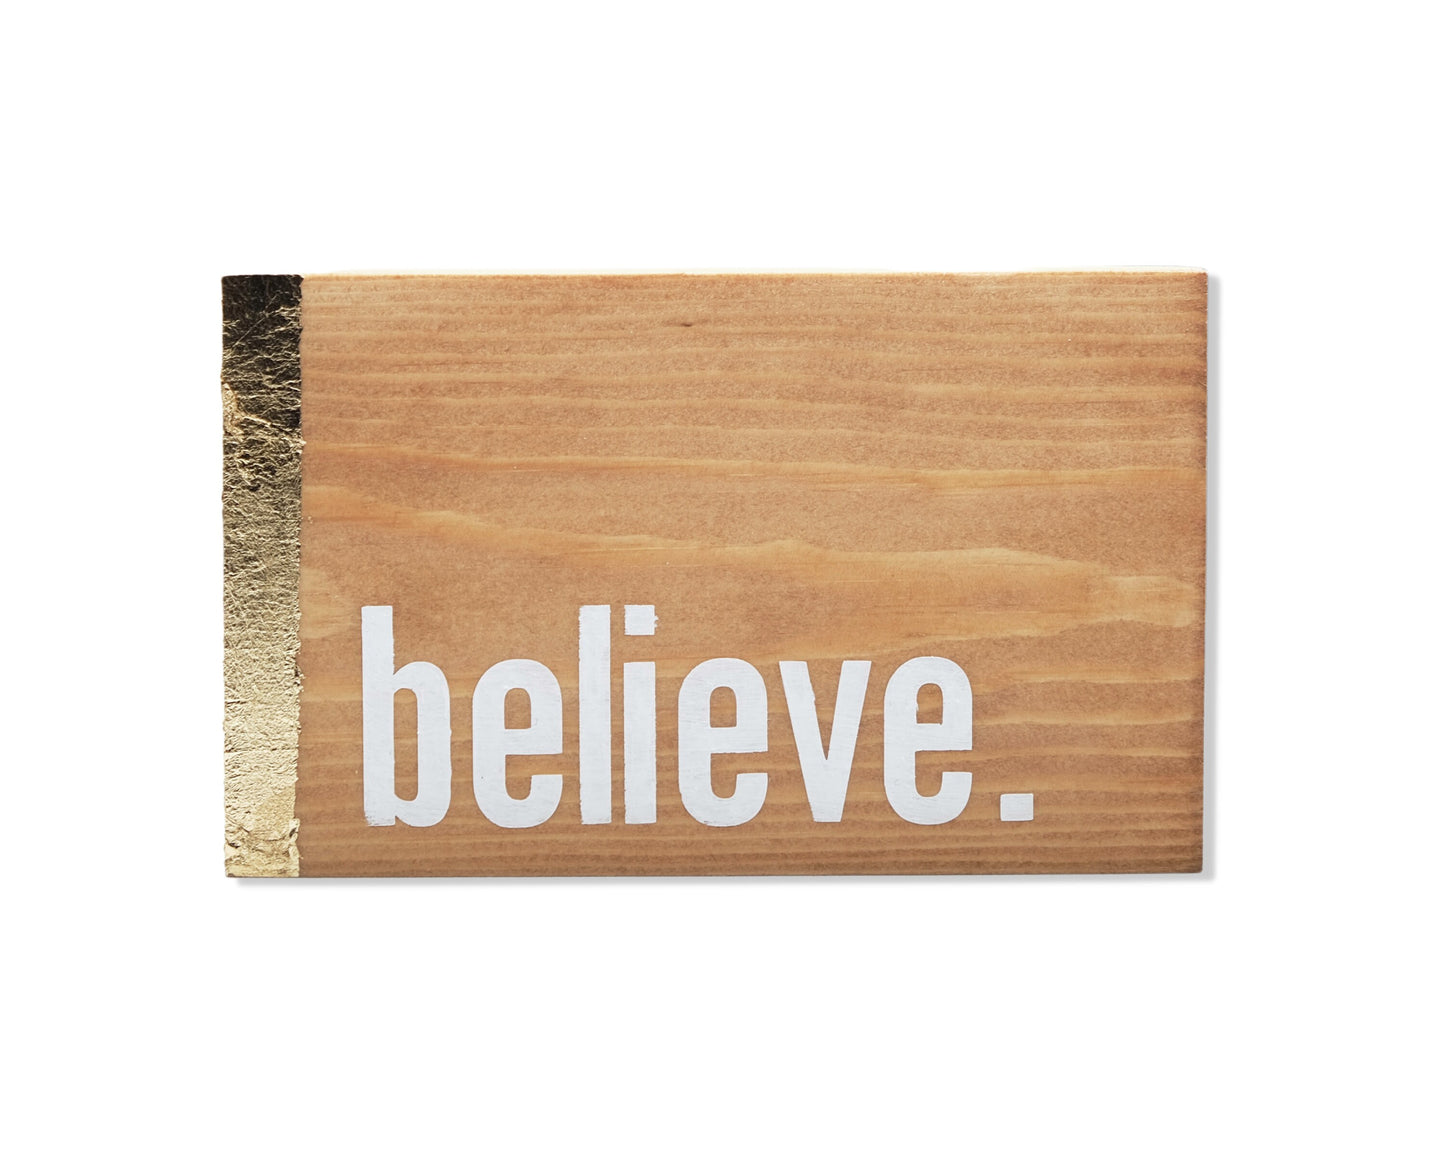 Small freestanding rectangular wooden sign facing straight on. Natural wood with gold vertical border on left side. White painted message in chunky font with full stop, believe. Studio style photo with white background.